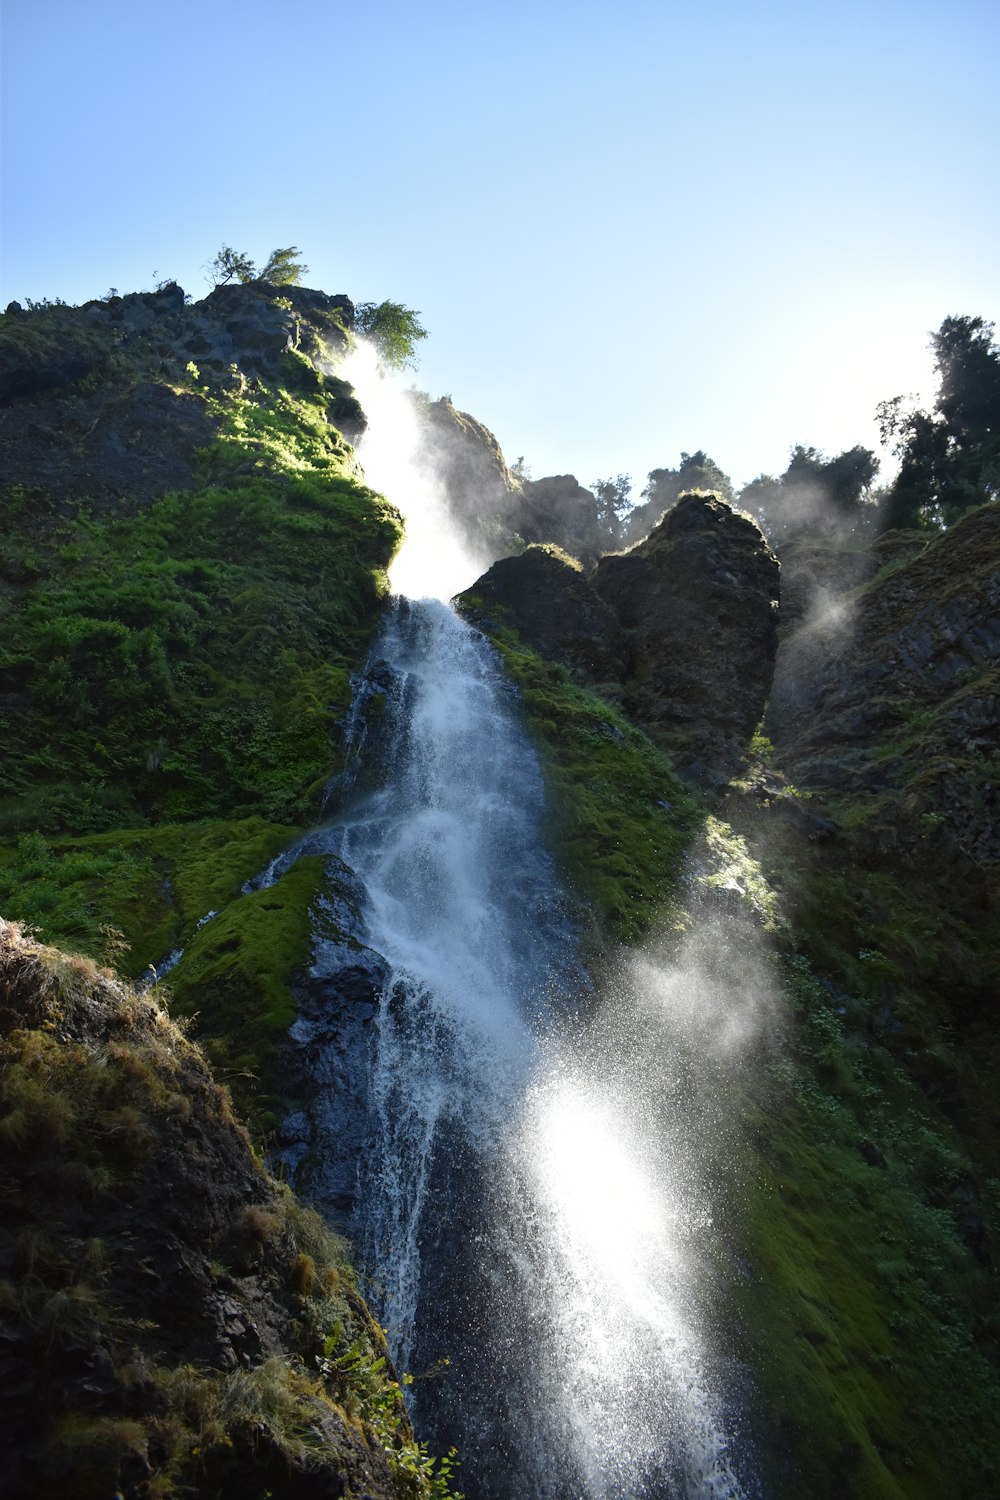 green mountain with waterfalls under blue sky during daytime